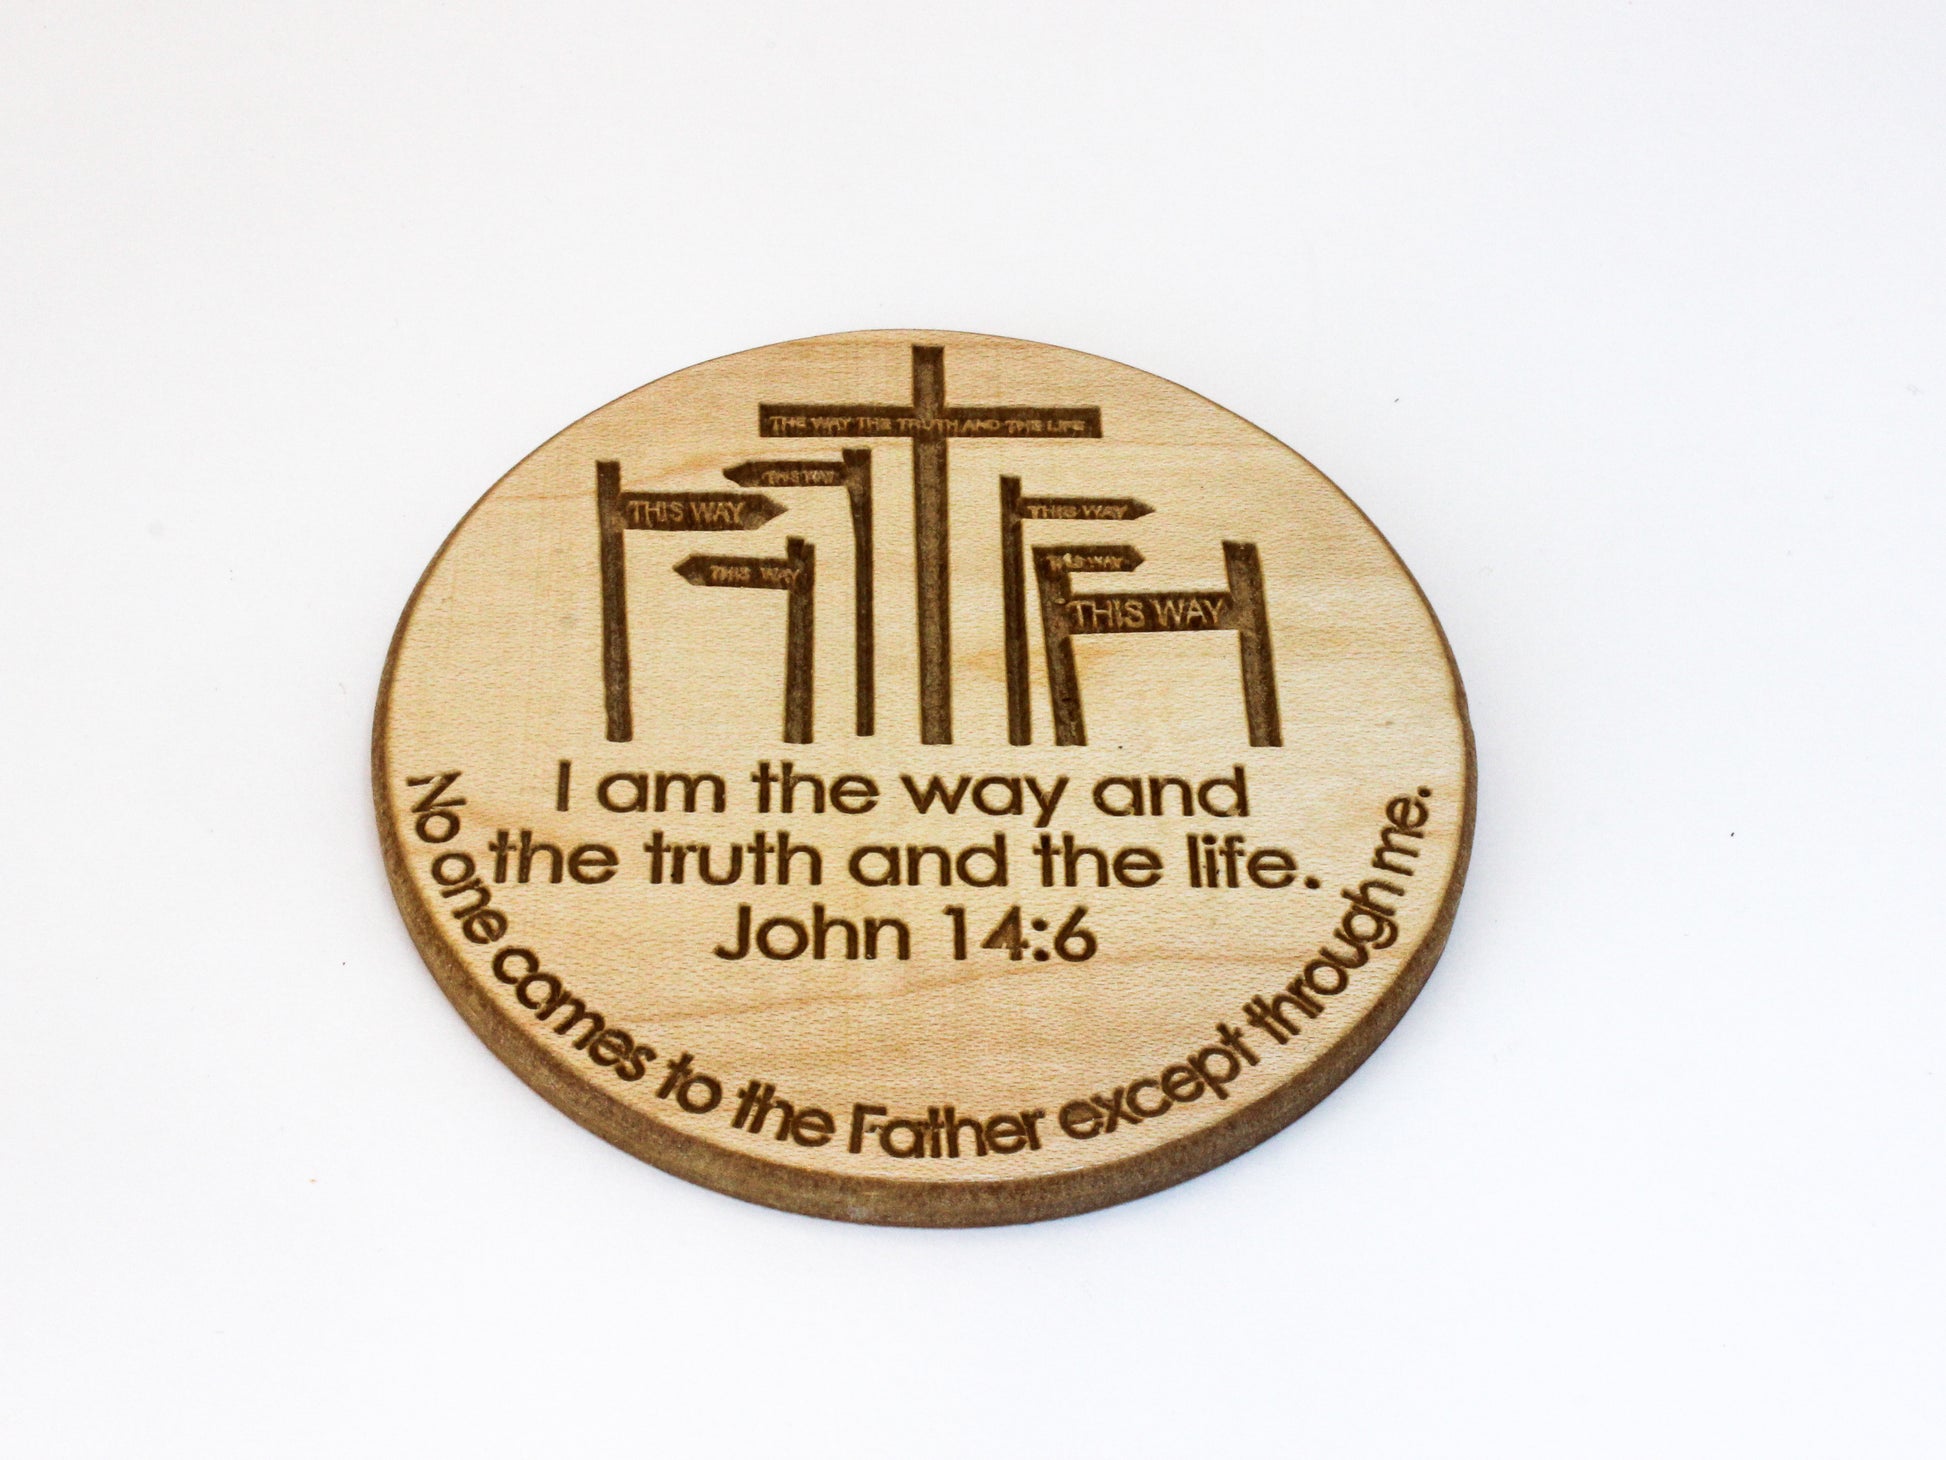 Wooden coaster featuring the cross and other signs, and the text of John 14:6 "I am the way and the truth and the life. No one comes to the Father except through me"